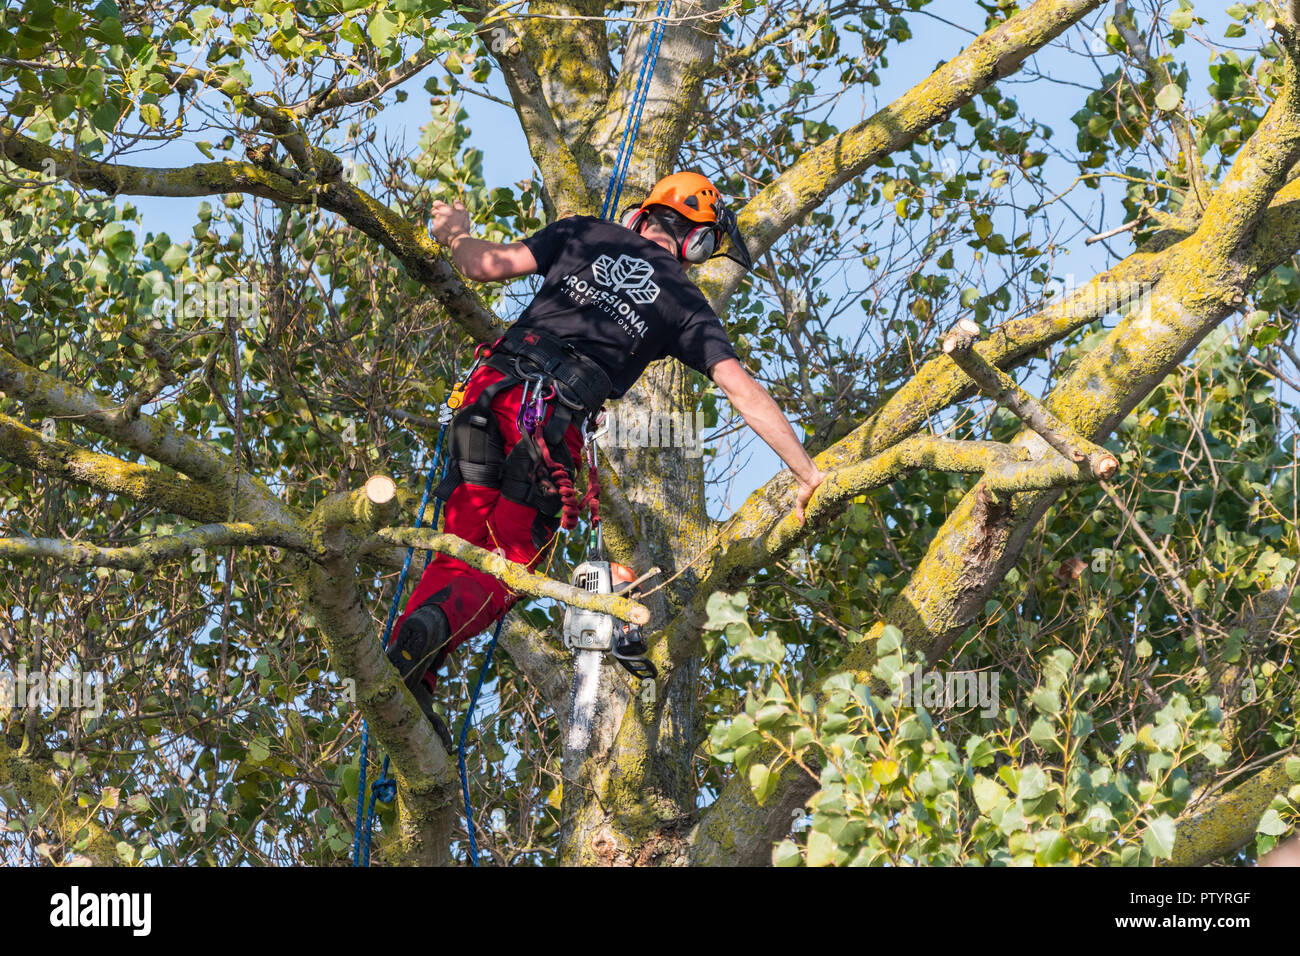 Tree feller up a tree in Autumn secured by rope using a saw to trim a tree, in the UK. Tree surgery. Tree felling. Tree surgeon. Tree pruning. Stock Photo